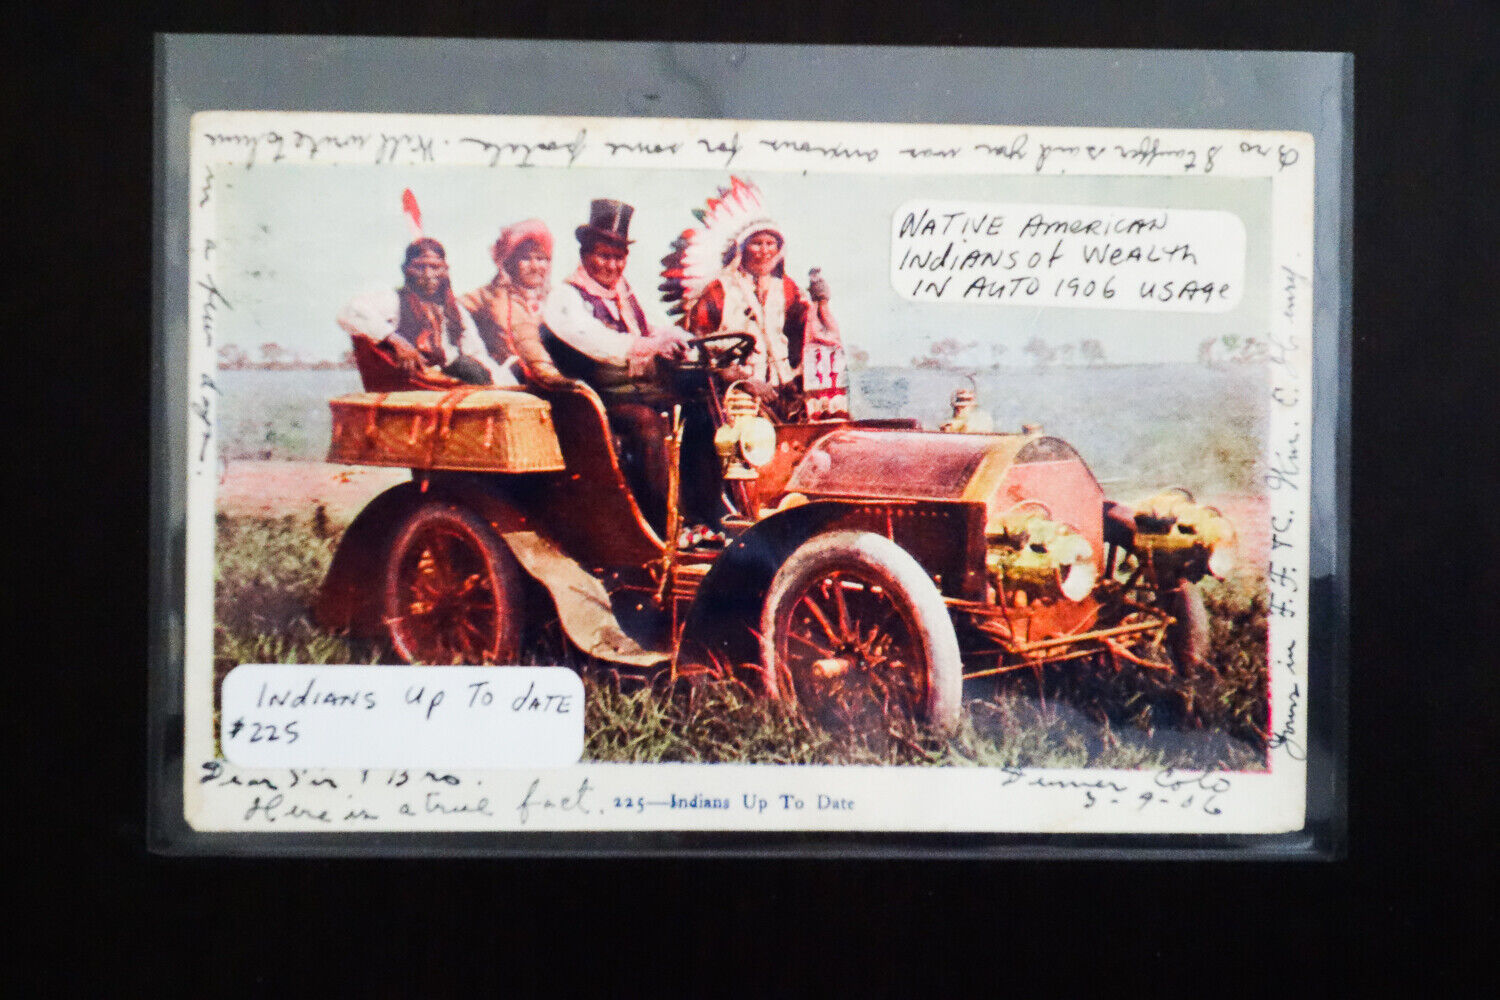 Native American Indians of Wealth in Auto 1906 Postcard JERANIMO